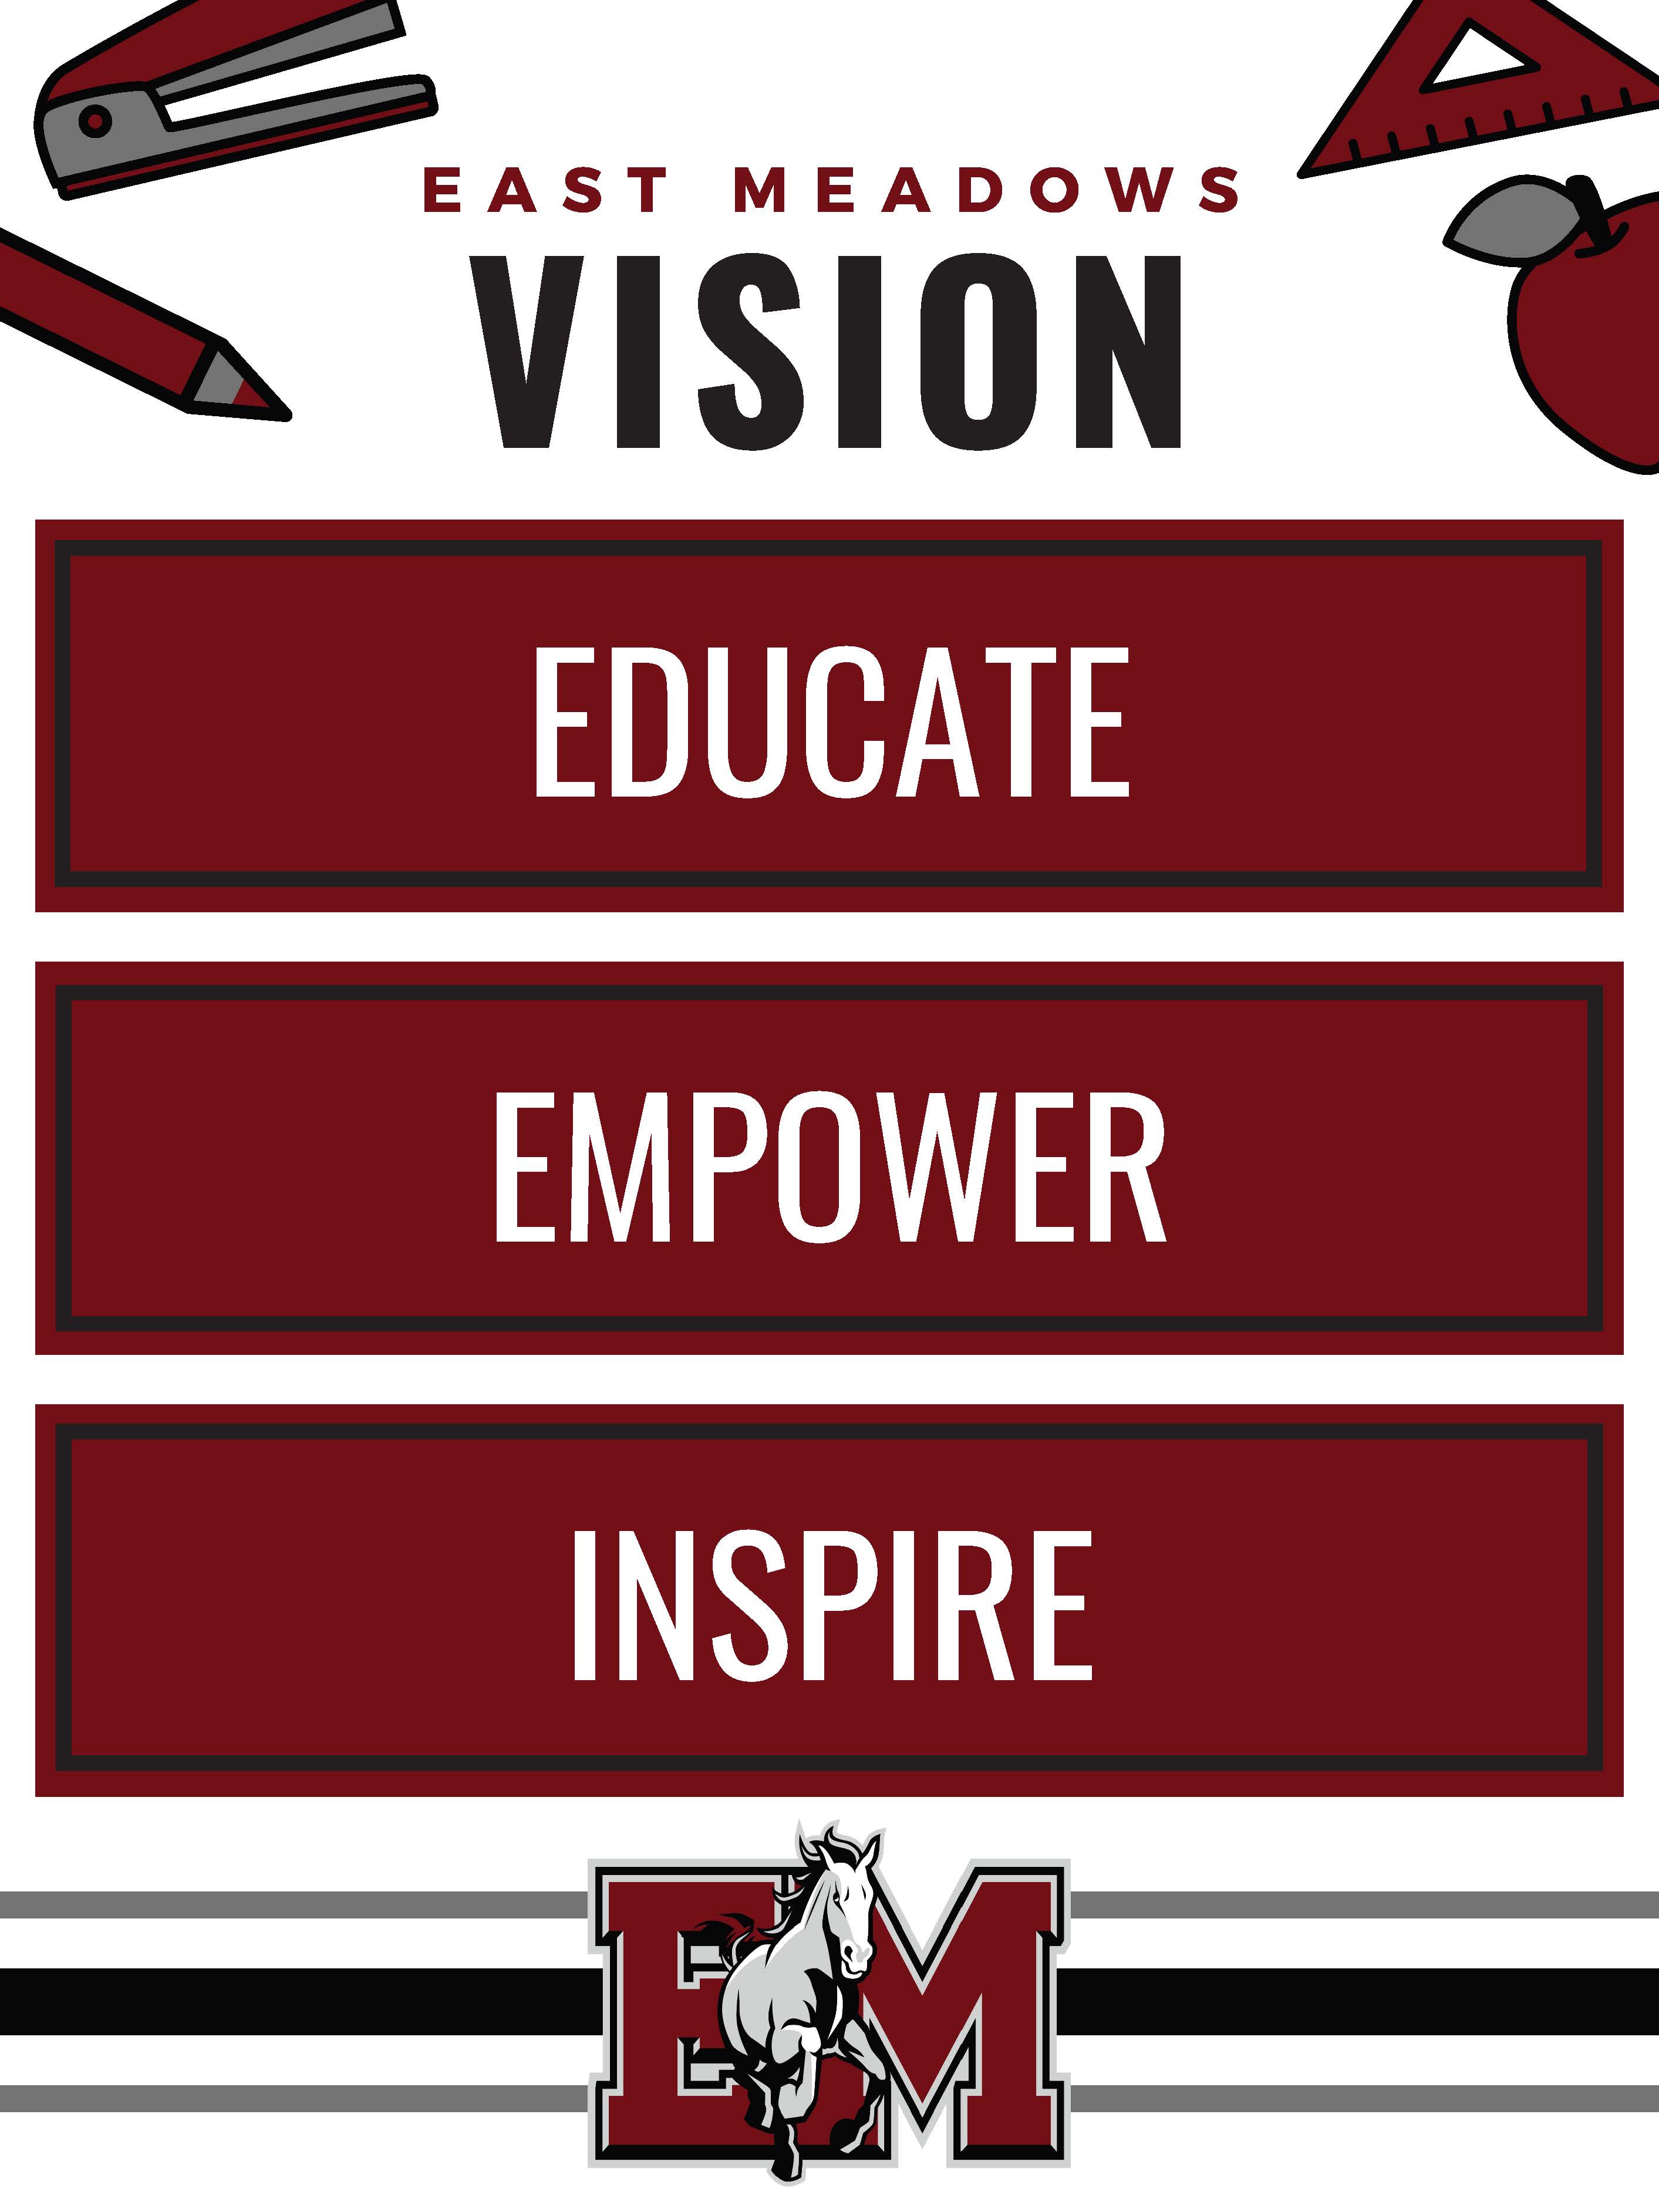 Mission Statement Educate Empower Inspire